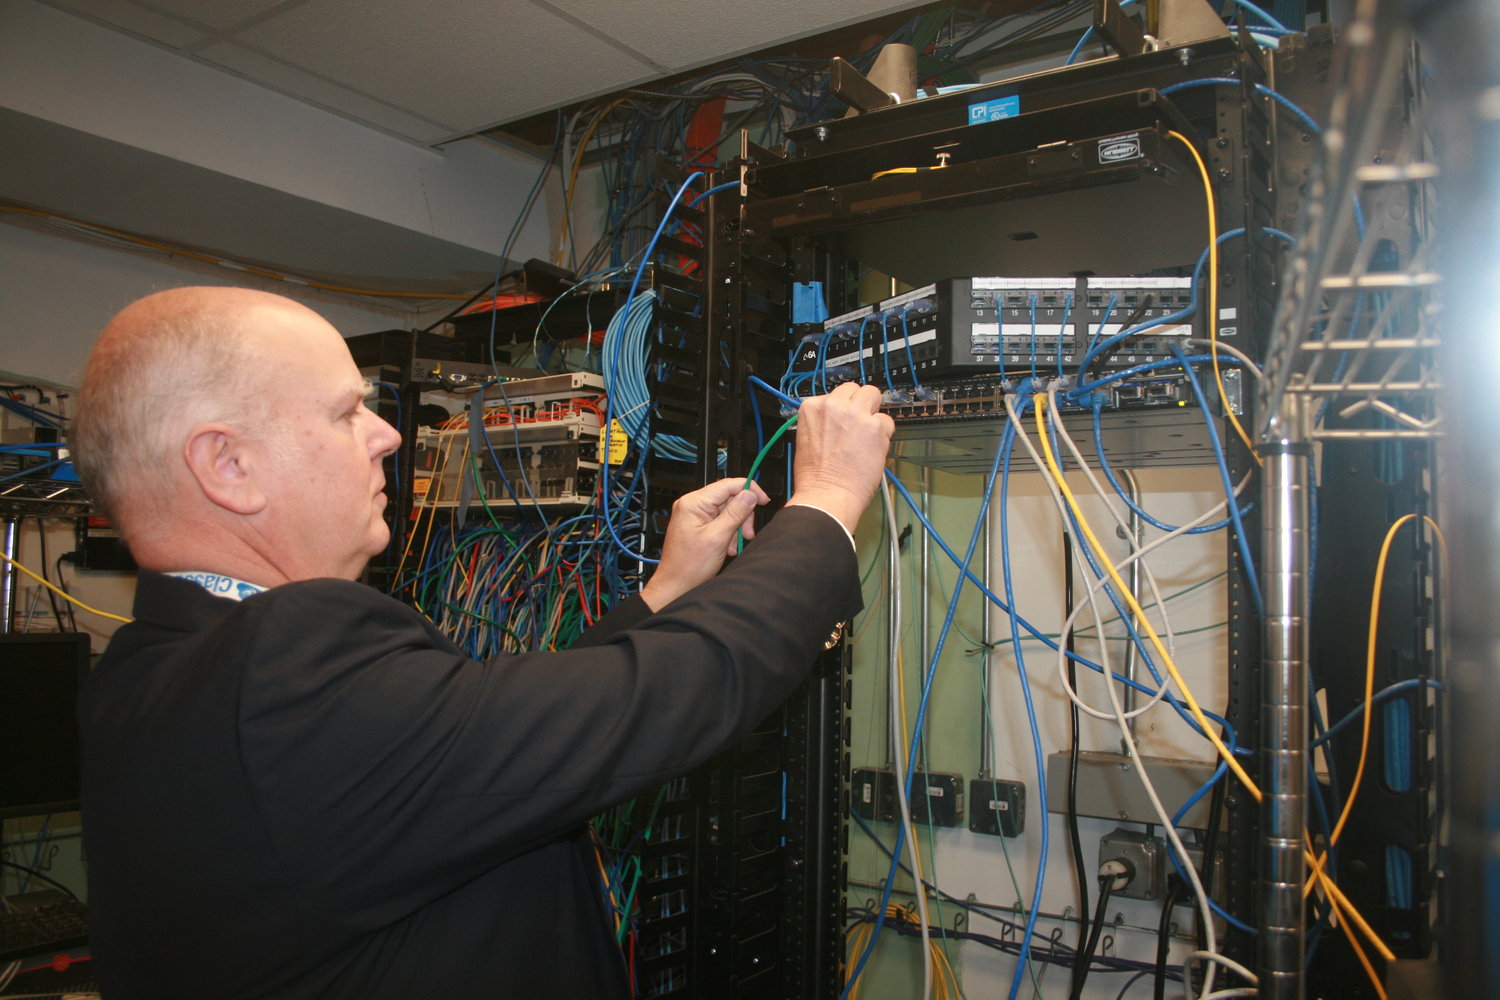 The West Hempstead School District’s director of technology, Vincent Fleck, examined equipment. Ensuring that the network is secure is a constant endeavor.